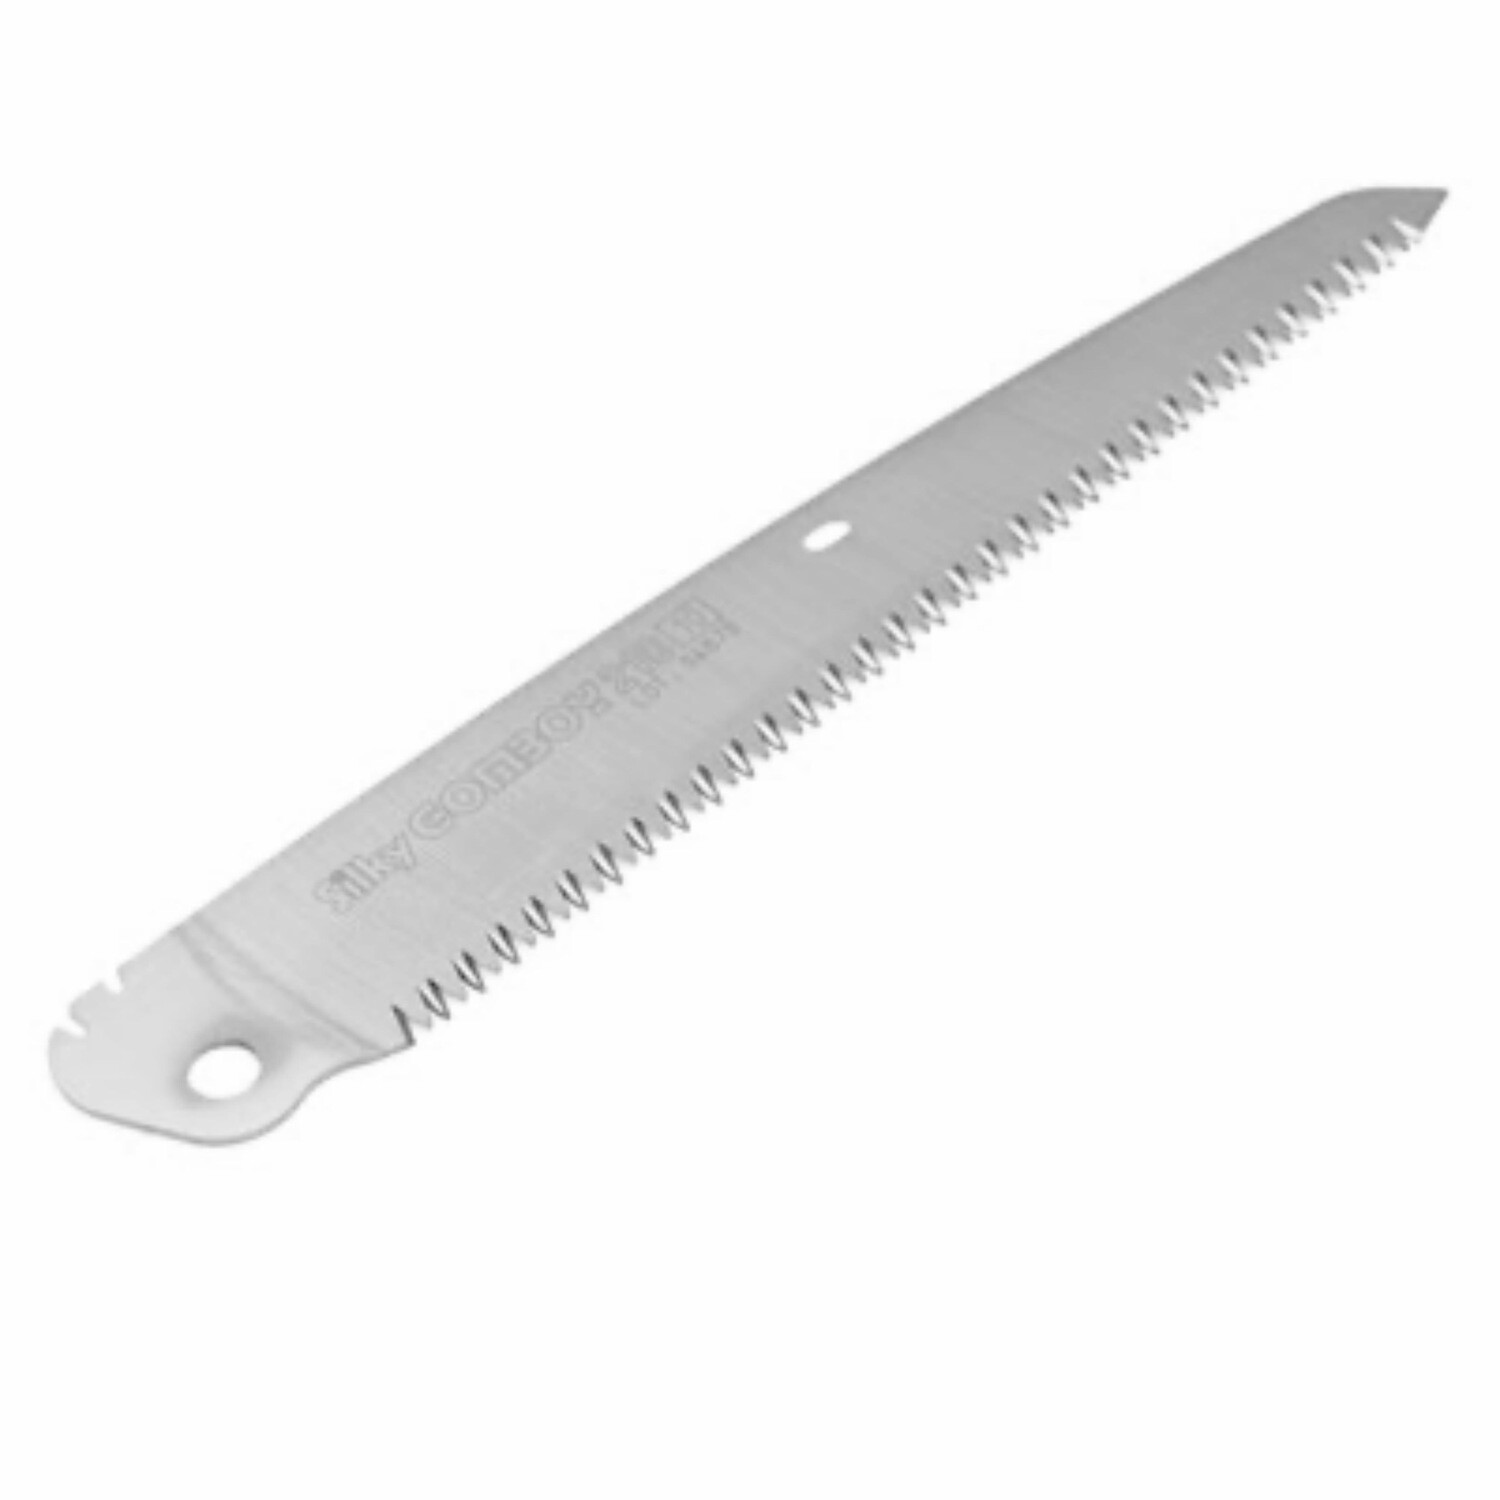 Silky GOMBOY 210mm, Medium Teeth, Saw Replacement Blade [BLADE ONLY]